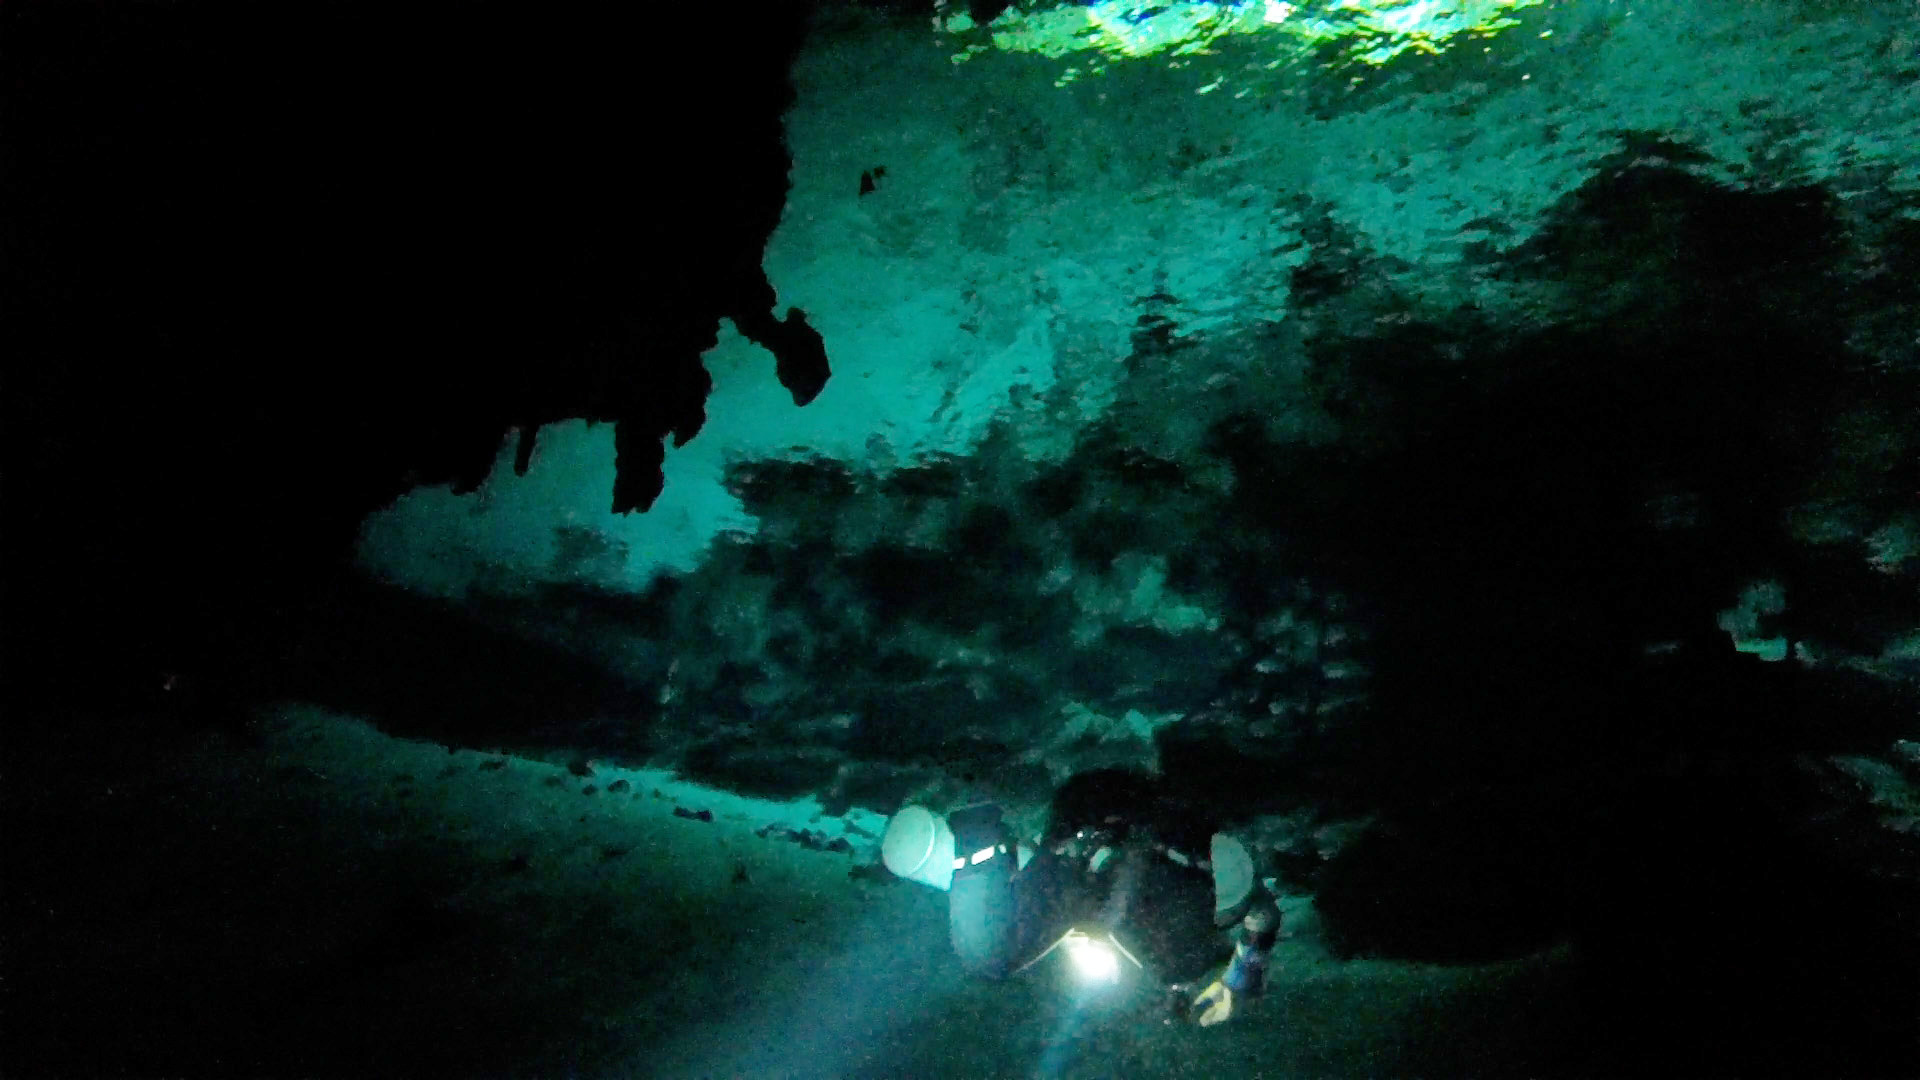 A diving guide dives in a cenote (limestone sinkhole) in the Dos Ojos cave system near Cancún, Mexico.